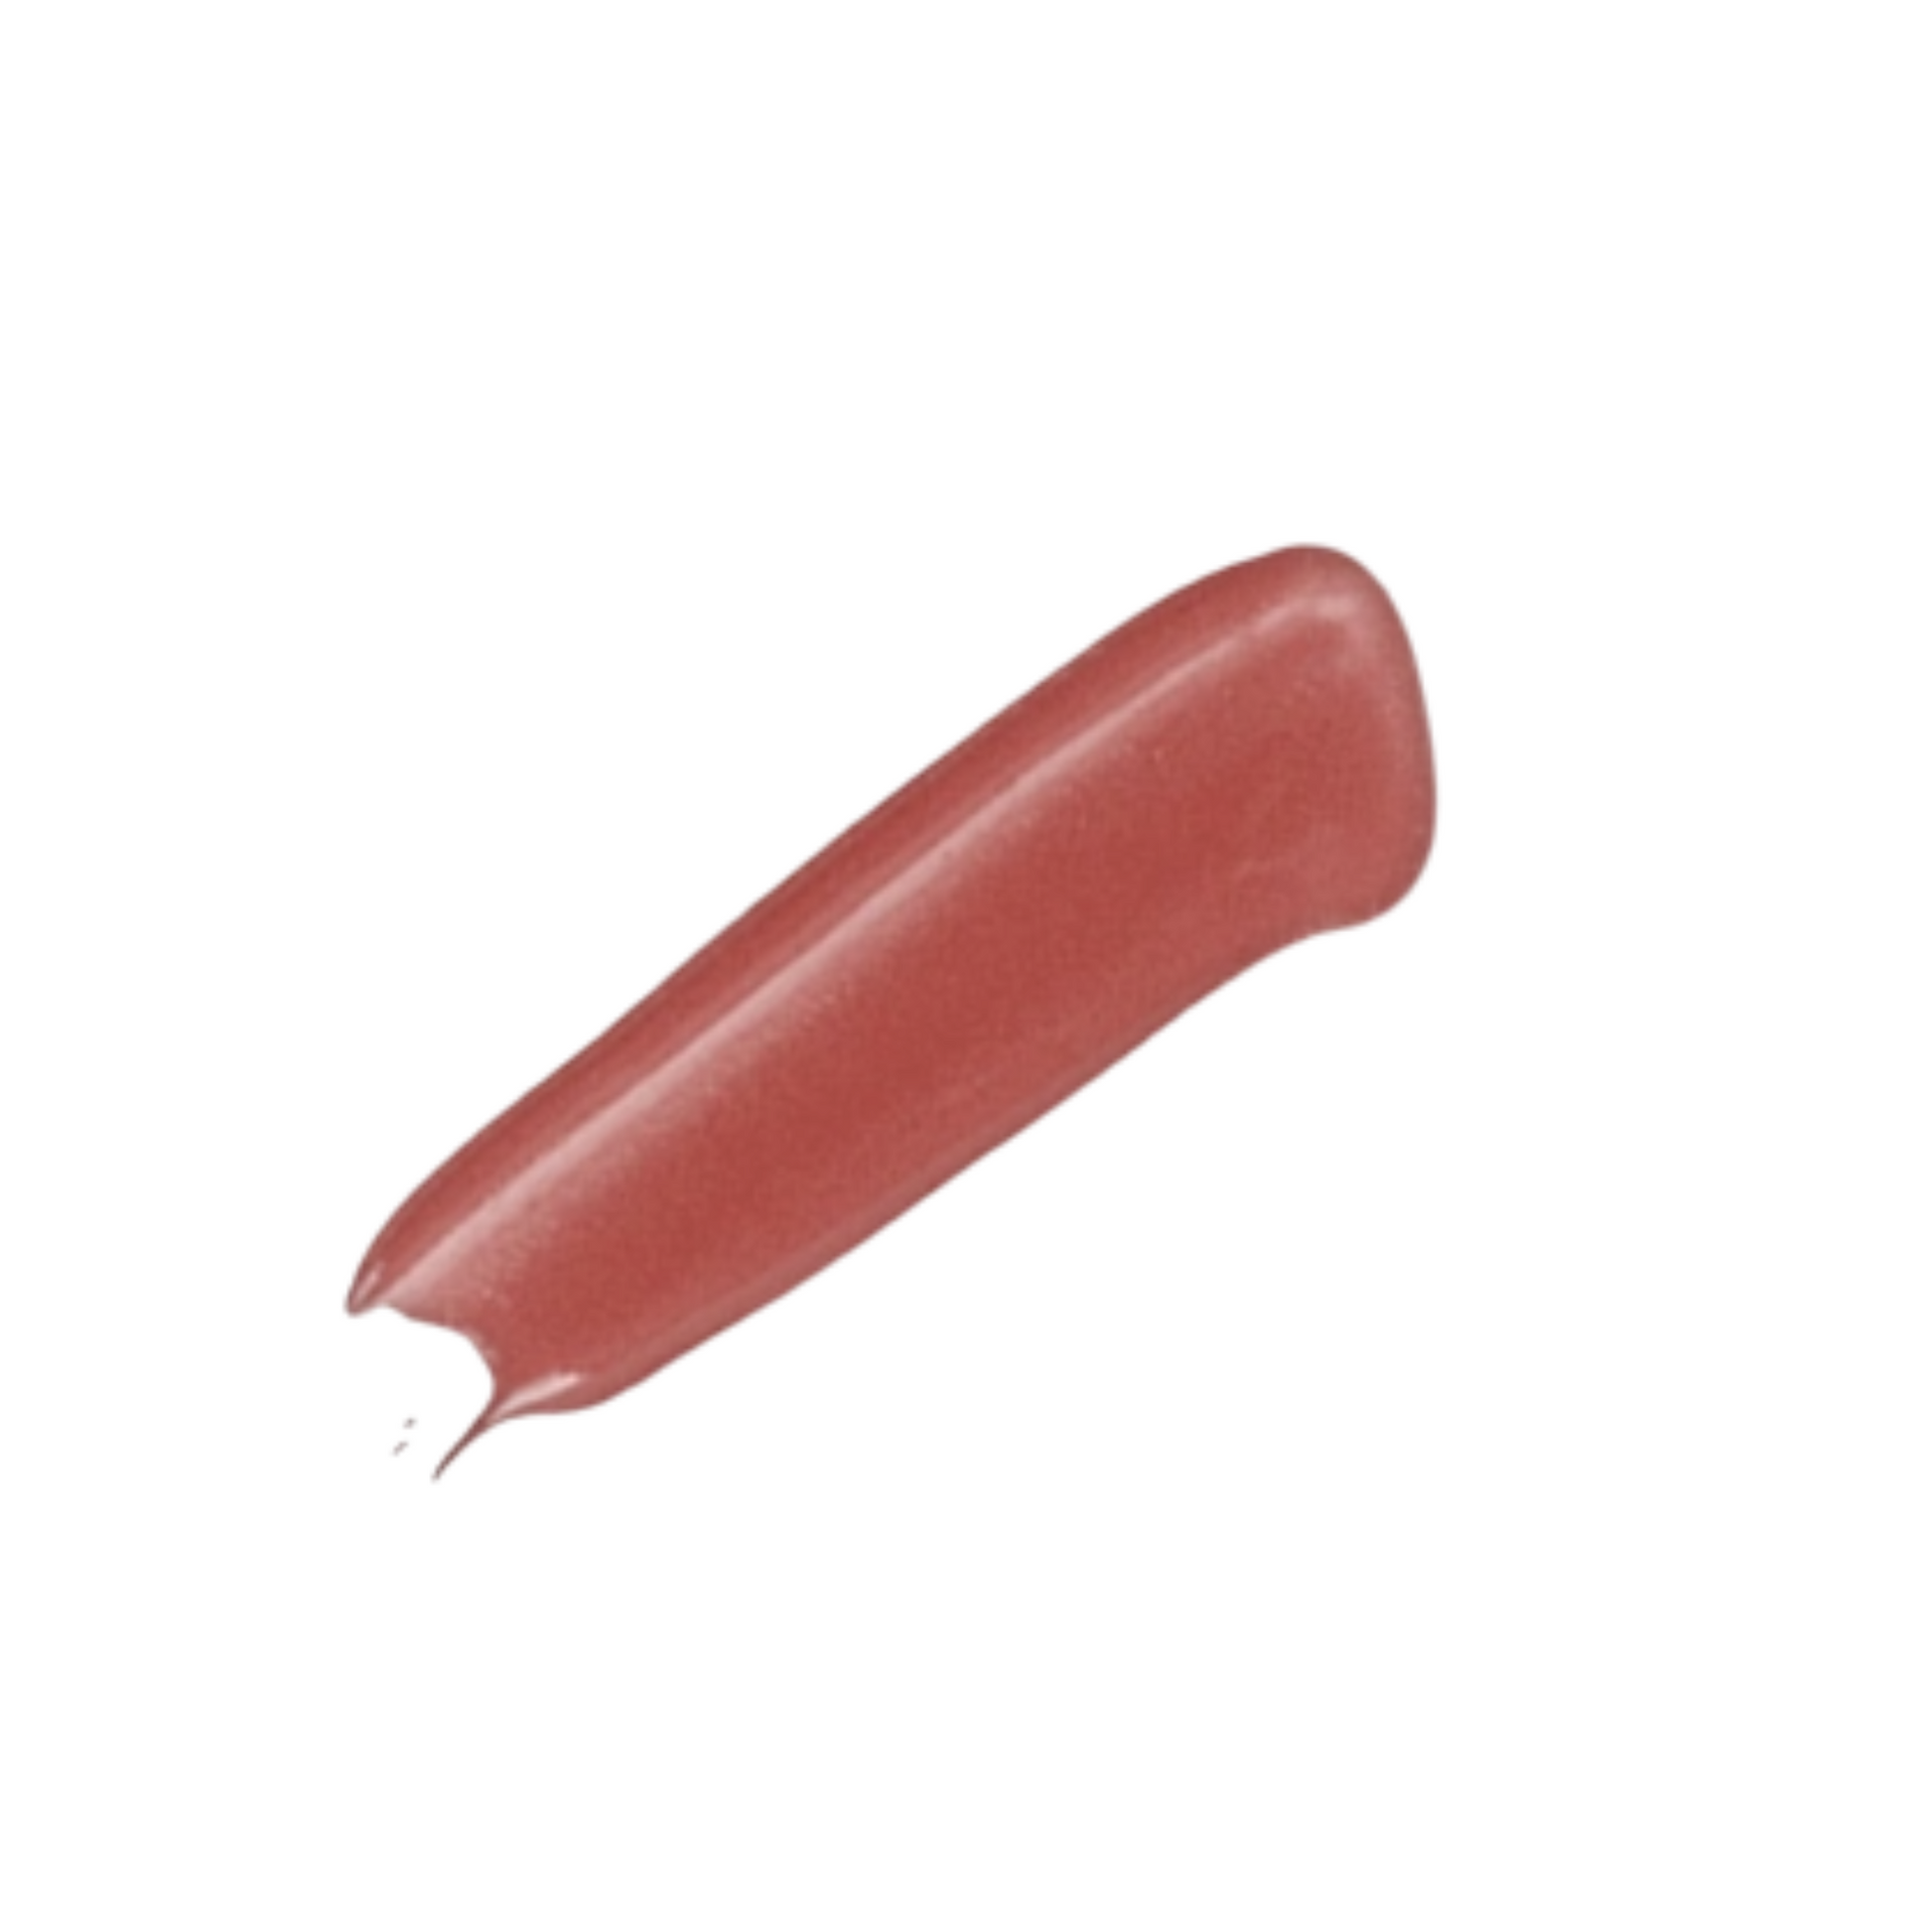 Moart Velvet Tint Collection is designed to glide onto the lips smoothly and dry down quickly.